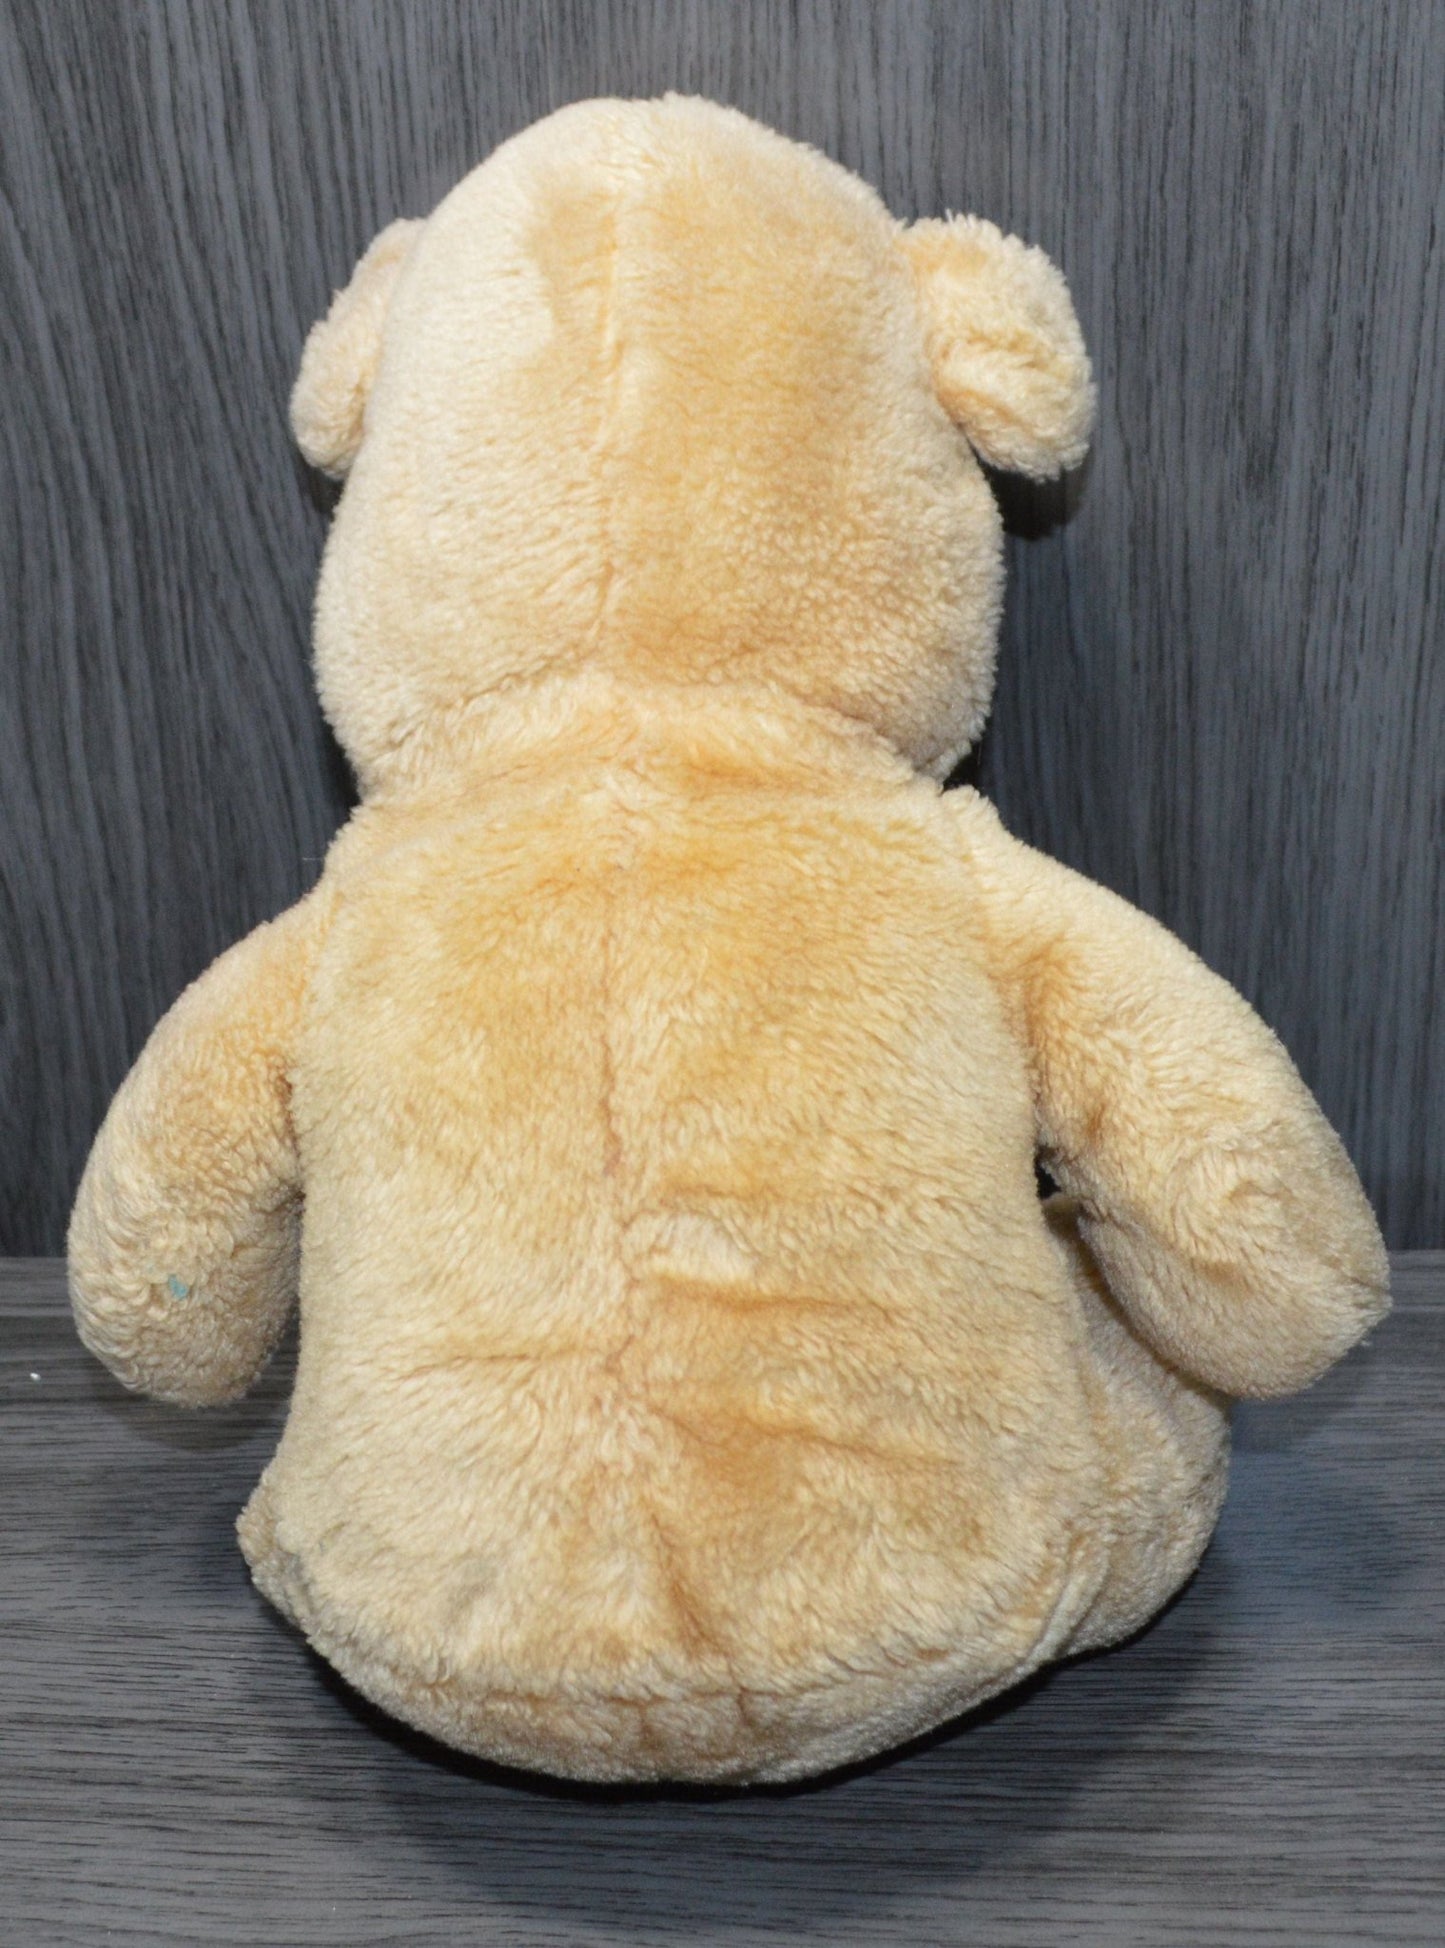 SOFT TOY TRADITIONAL TEDDY BEAR(PREVIOUSLY OWNED) GOOD CONDITION - TMD167207